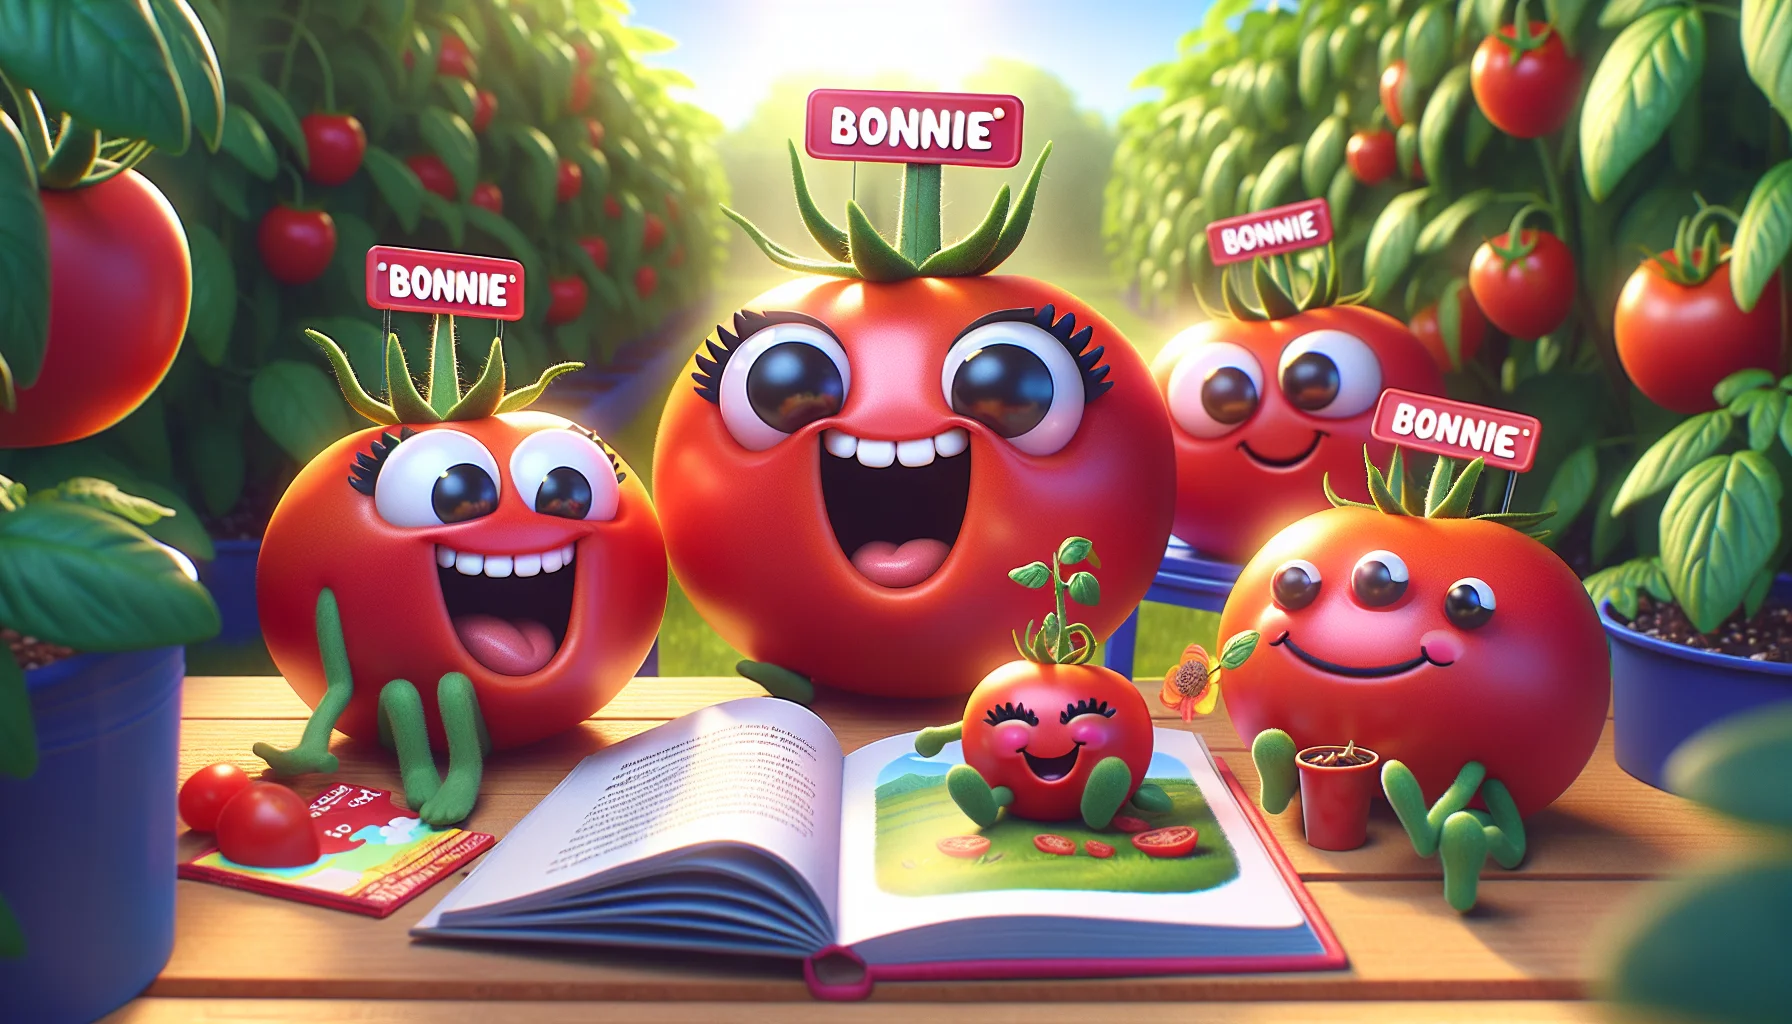 Visualize a humorous scene set in a vibrant garden. The focus is on ripe tomatoes with animated 'Bonnie' nametags, looking gleeful with exaggerated smiles and round eyes. As a playful perspective towards gardening, these tomatoes are doing daily activities just like humans — reading a book about growth, sunbathing under the radiant sun, or having a small picnic with other vegetable buddies. The atmosphere is lively and inviting, embodying the joyful spirit of gardening.